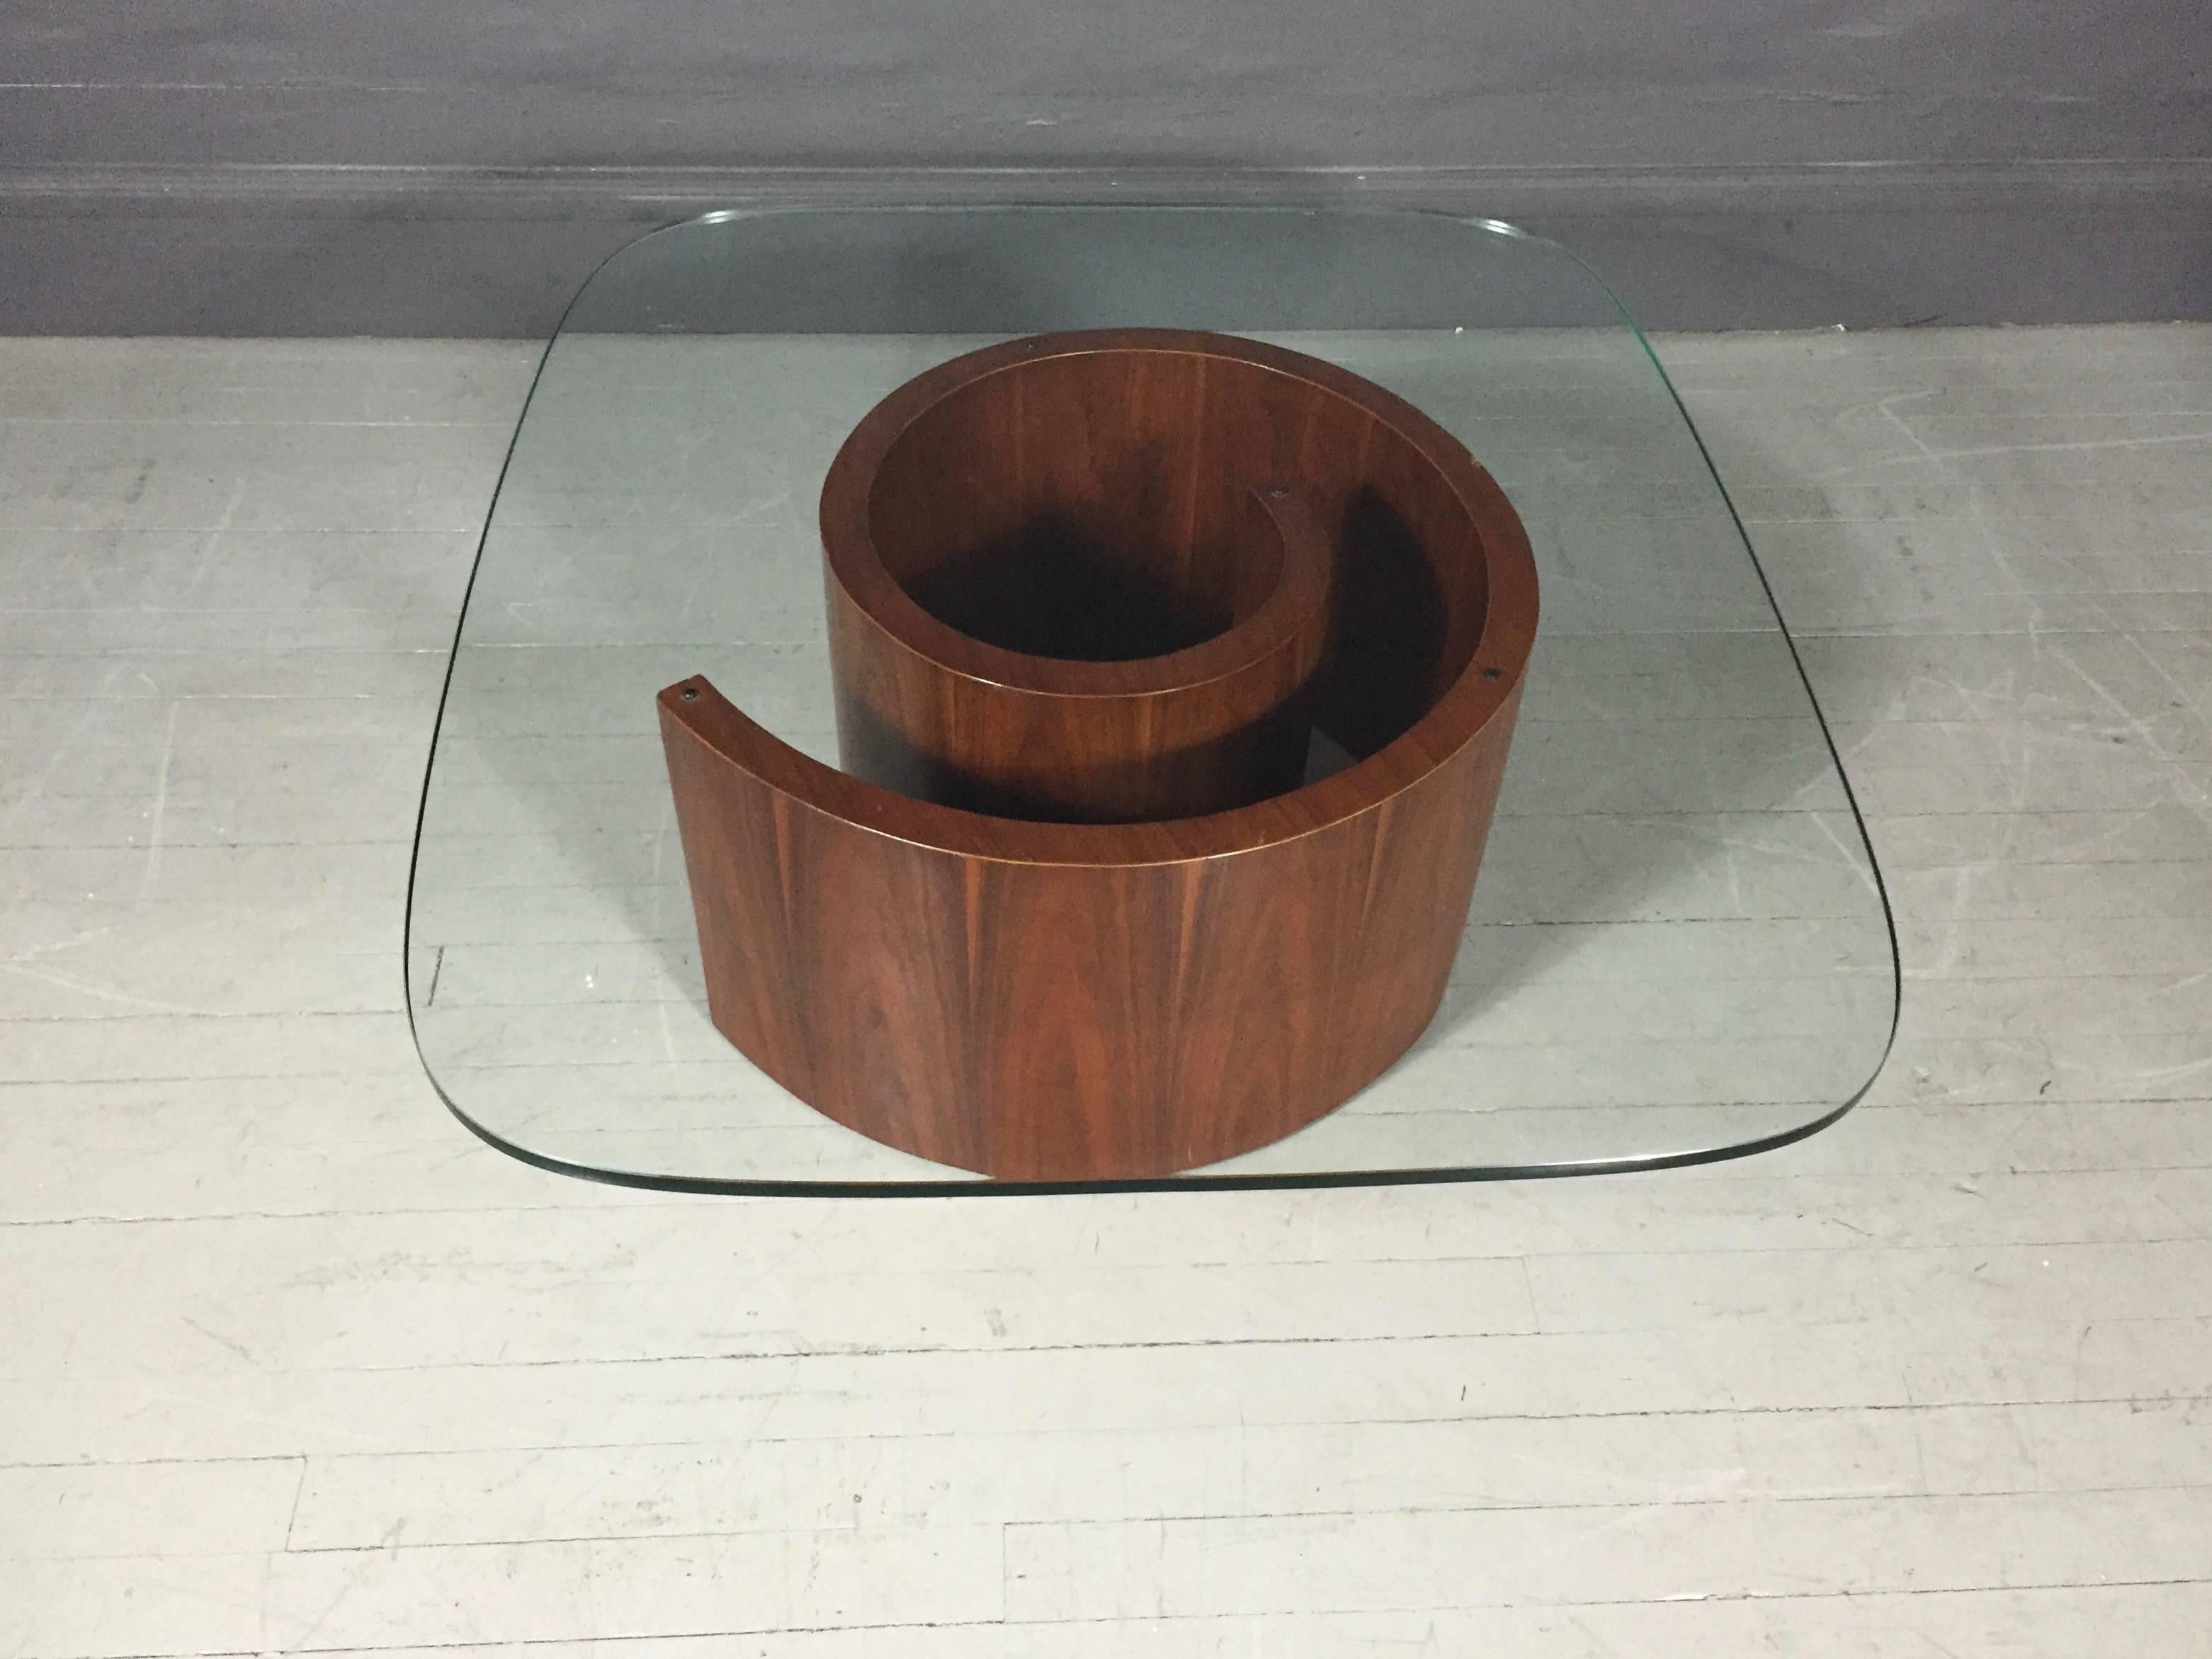 A classic piece of American modern design, the Snail table by Vladimir Kagan designed in 1954 for Selig Furniture Company. Lightweight circular base in walnut veneer belies it's strength - holding original heavy curved-edge rectangular glass top.